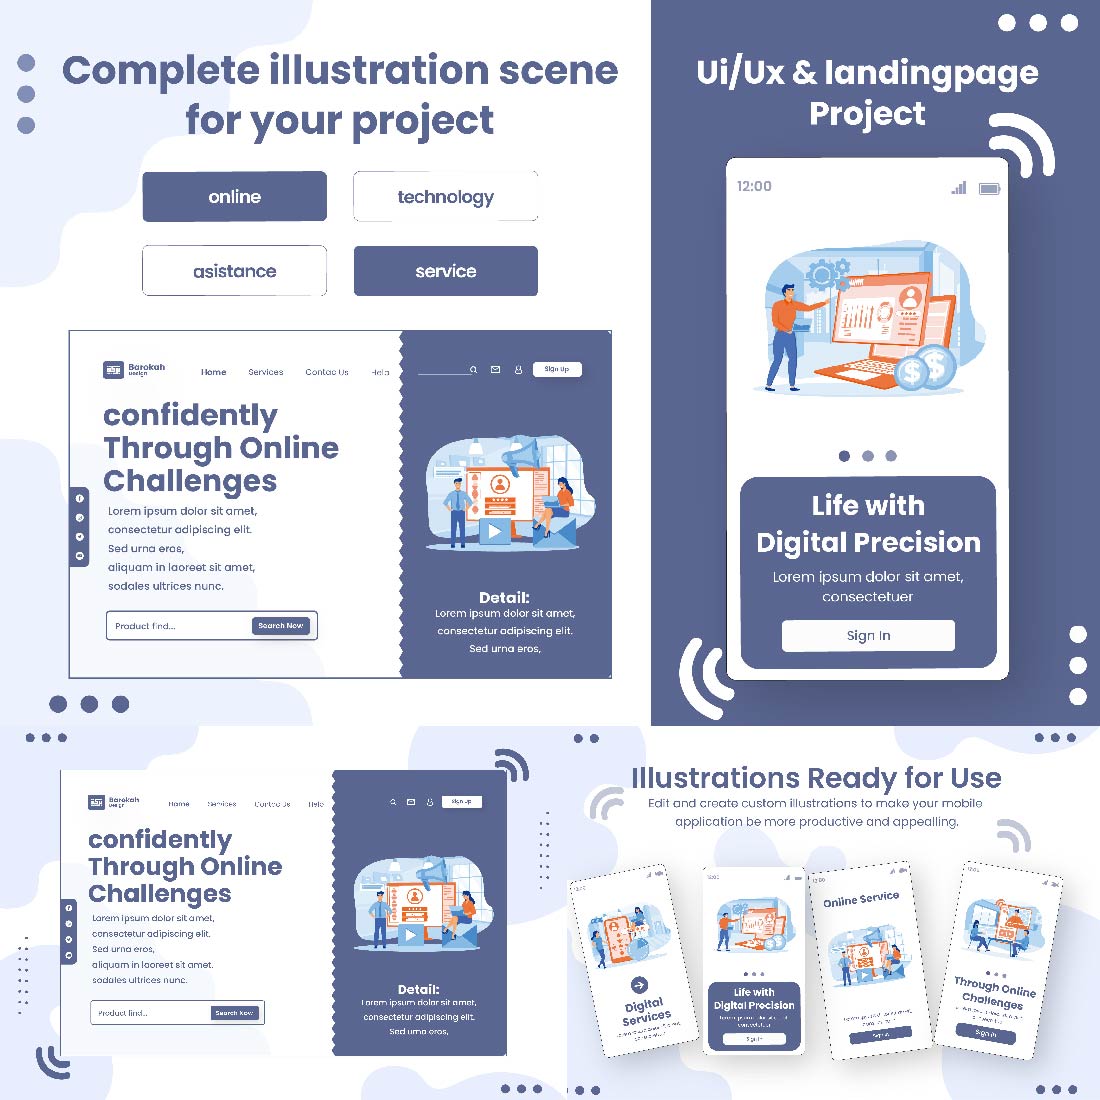 9 Illustrations Related to Online Service 1 preview image.